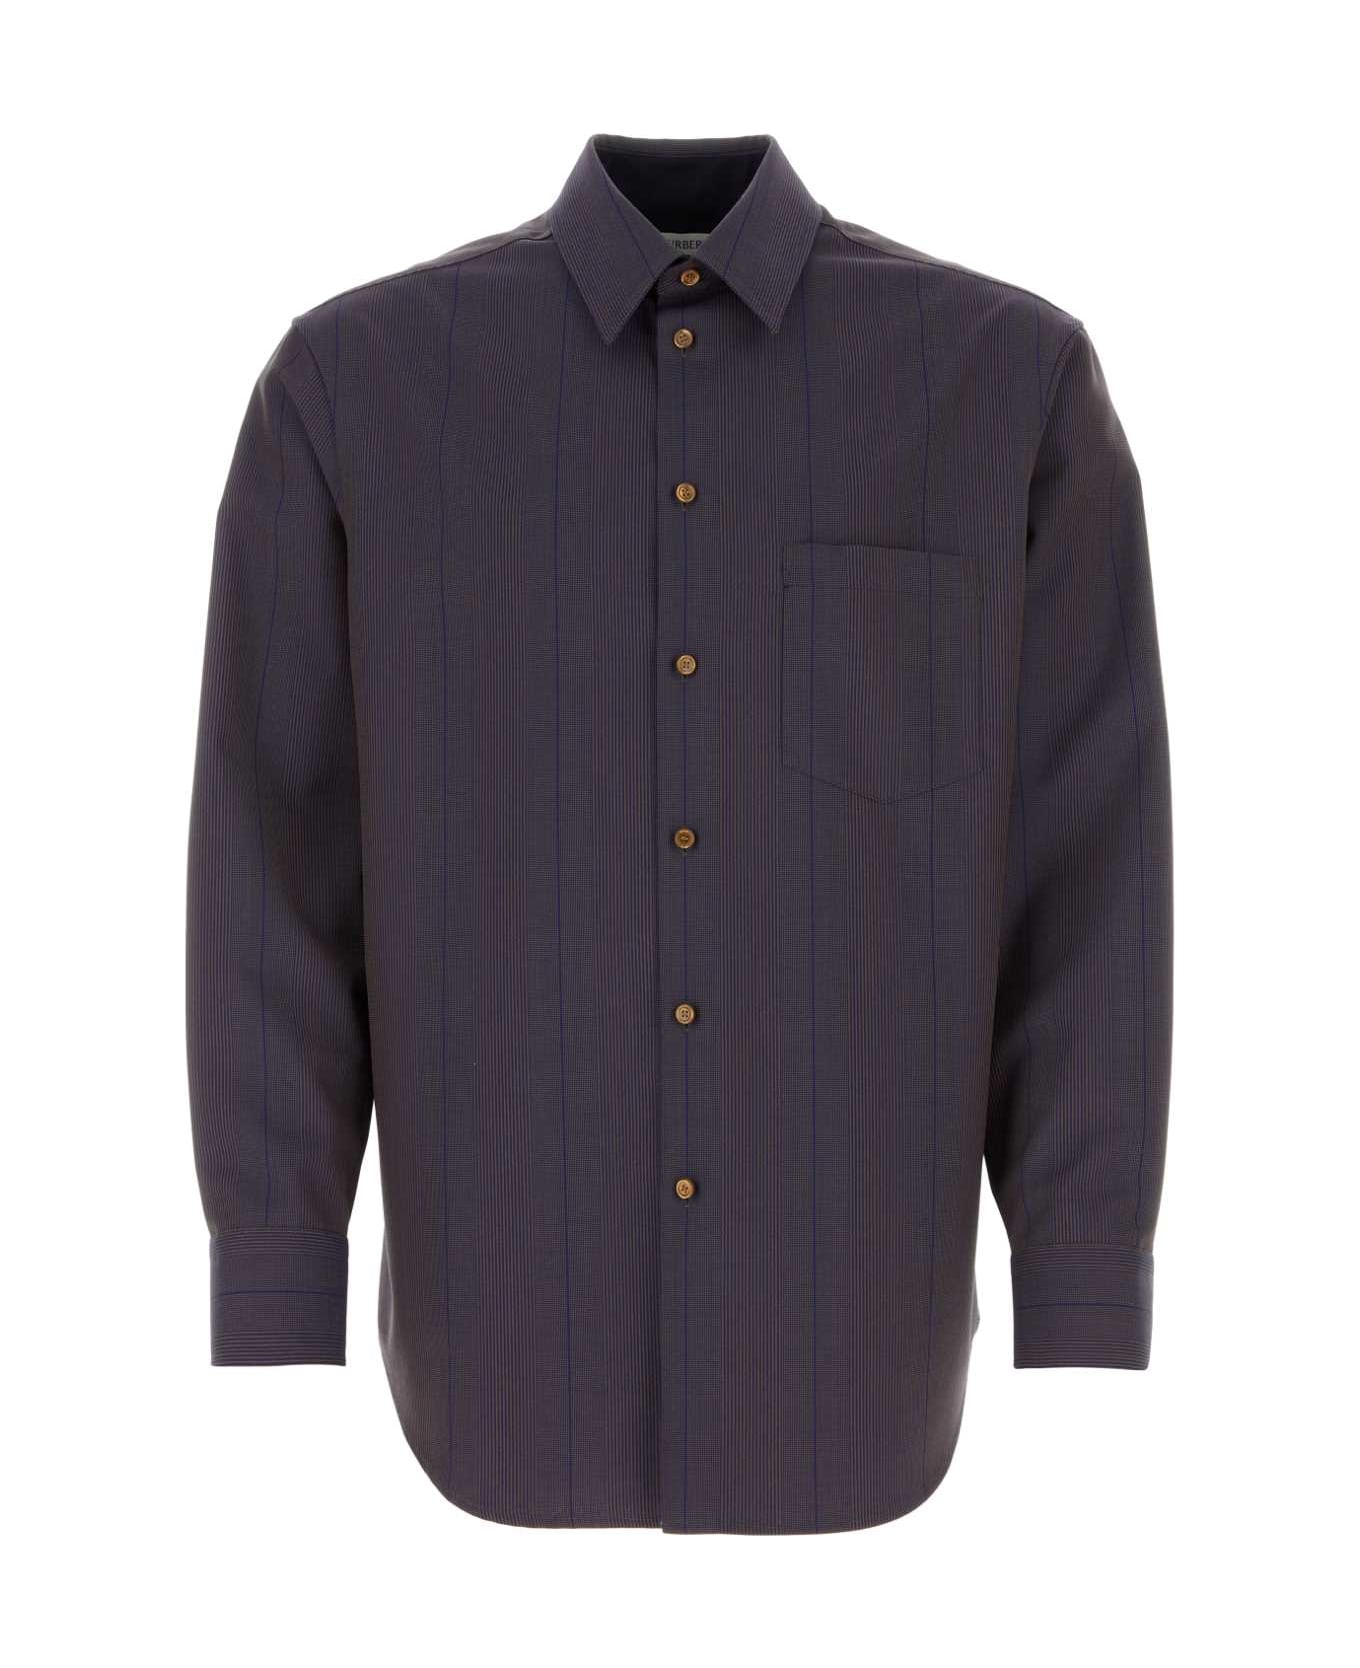 Burberry Embroidered Wool Shirt - BARREL